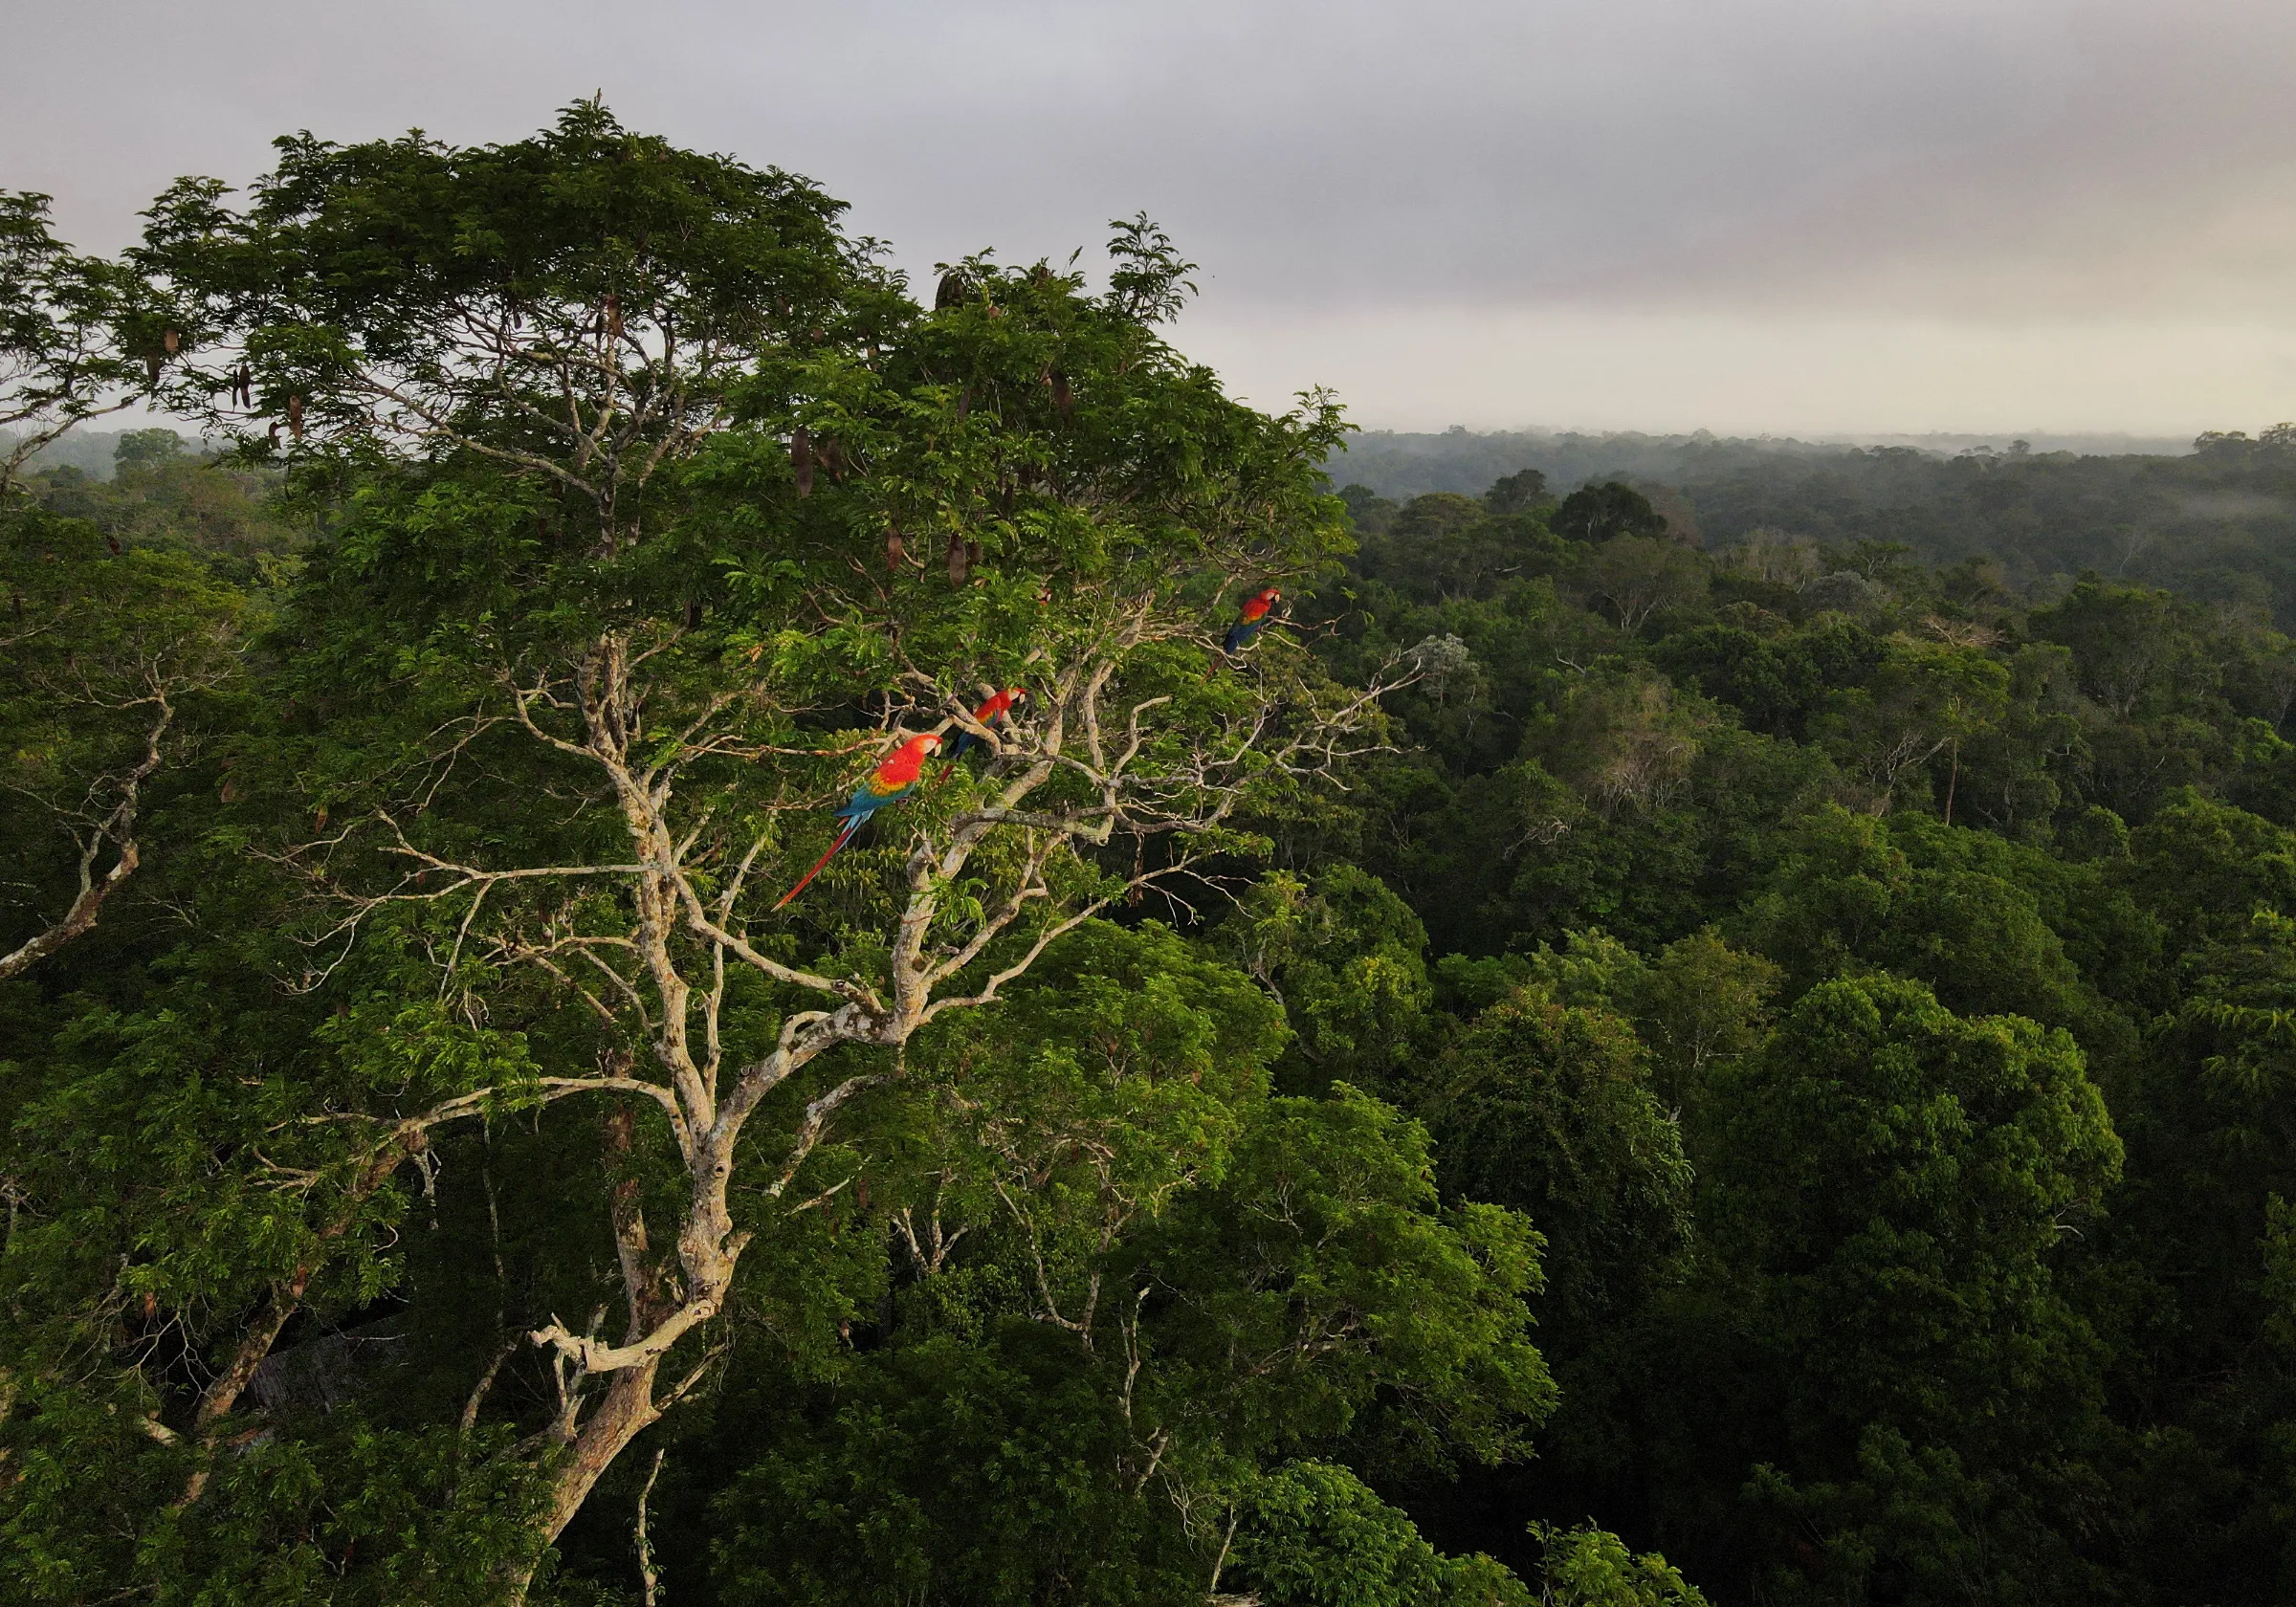 Macaws sit on a tree at the Amazon rainforest in Manaus, Amazonas State, Brazil October 26, 2022